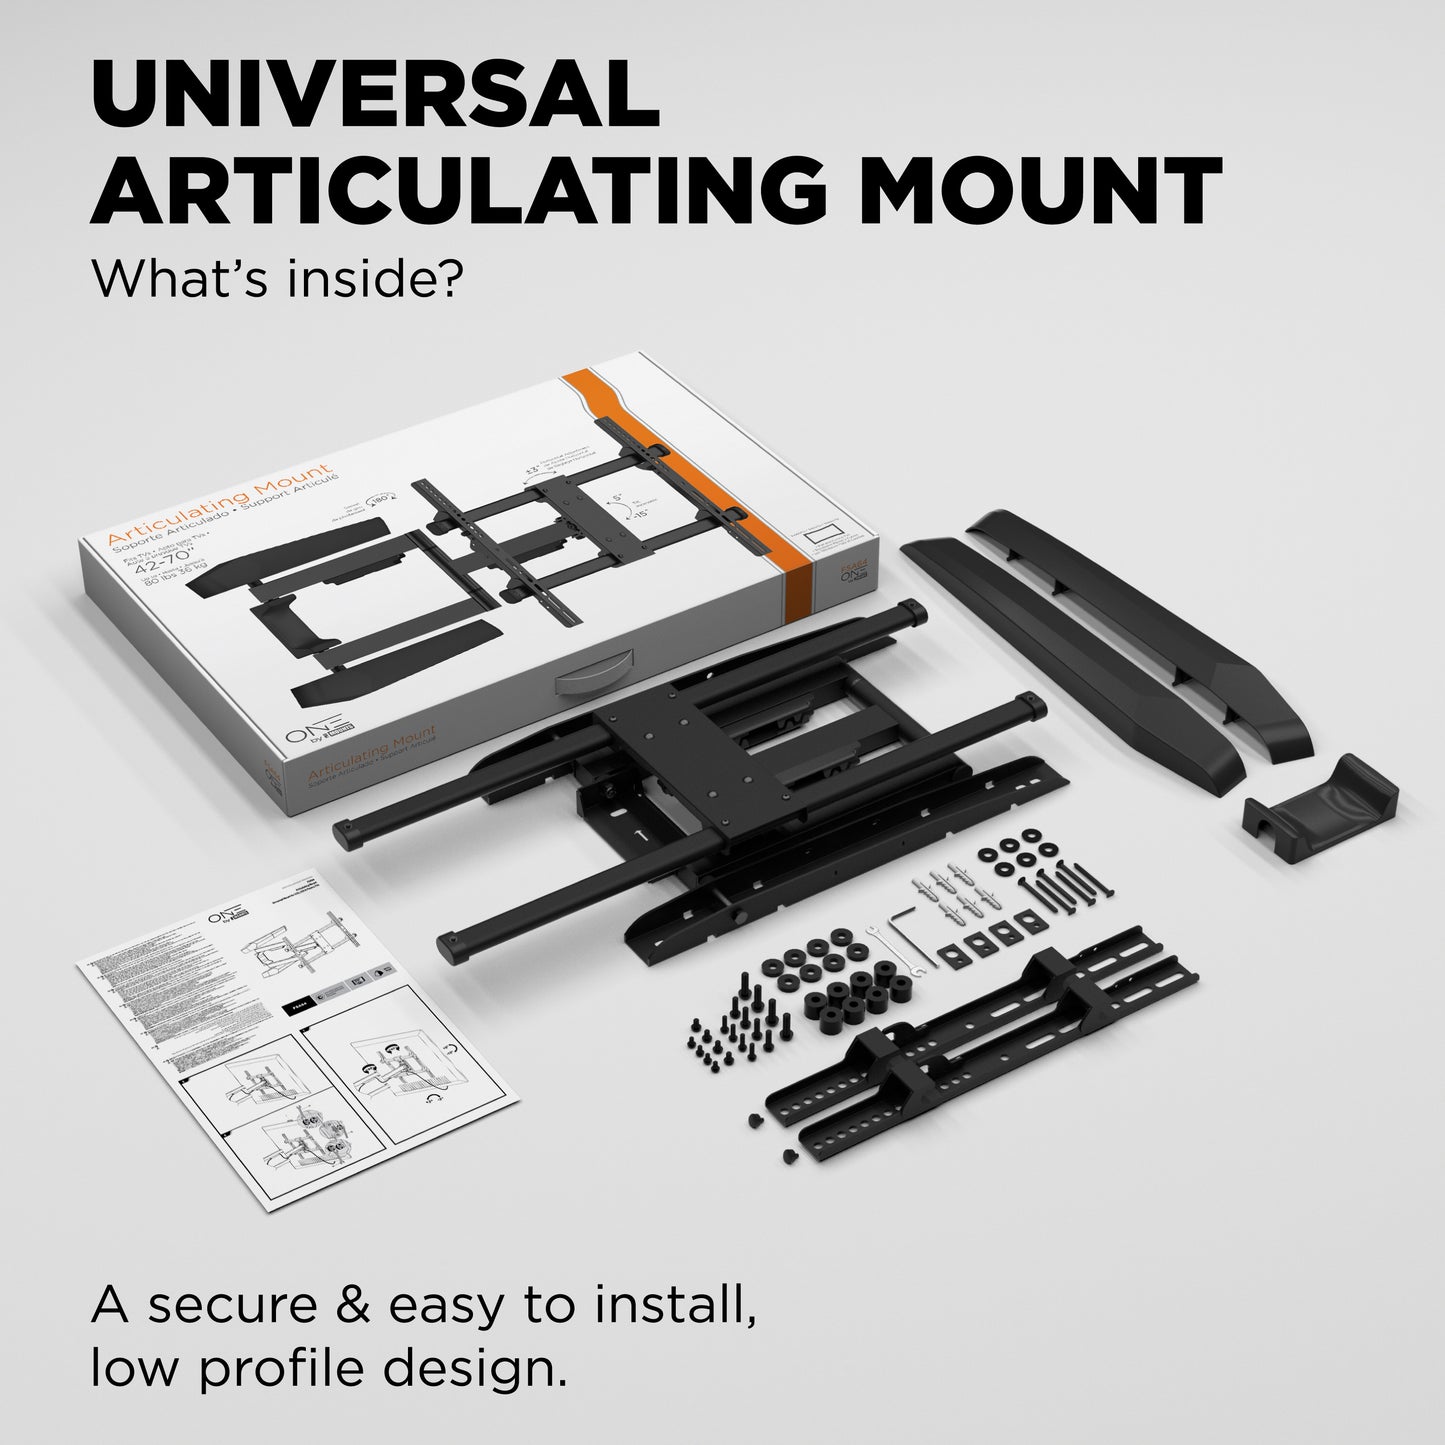 ProMounts Articulating/Full Motion TV Wall Mount for 42"-75" TVs Holds up to 90 lbs (FSA64)